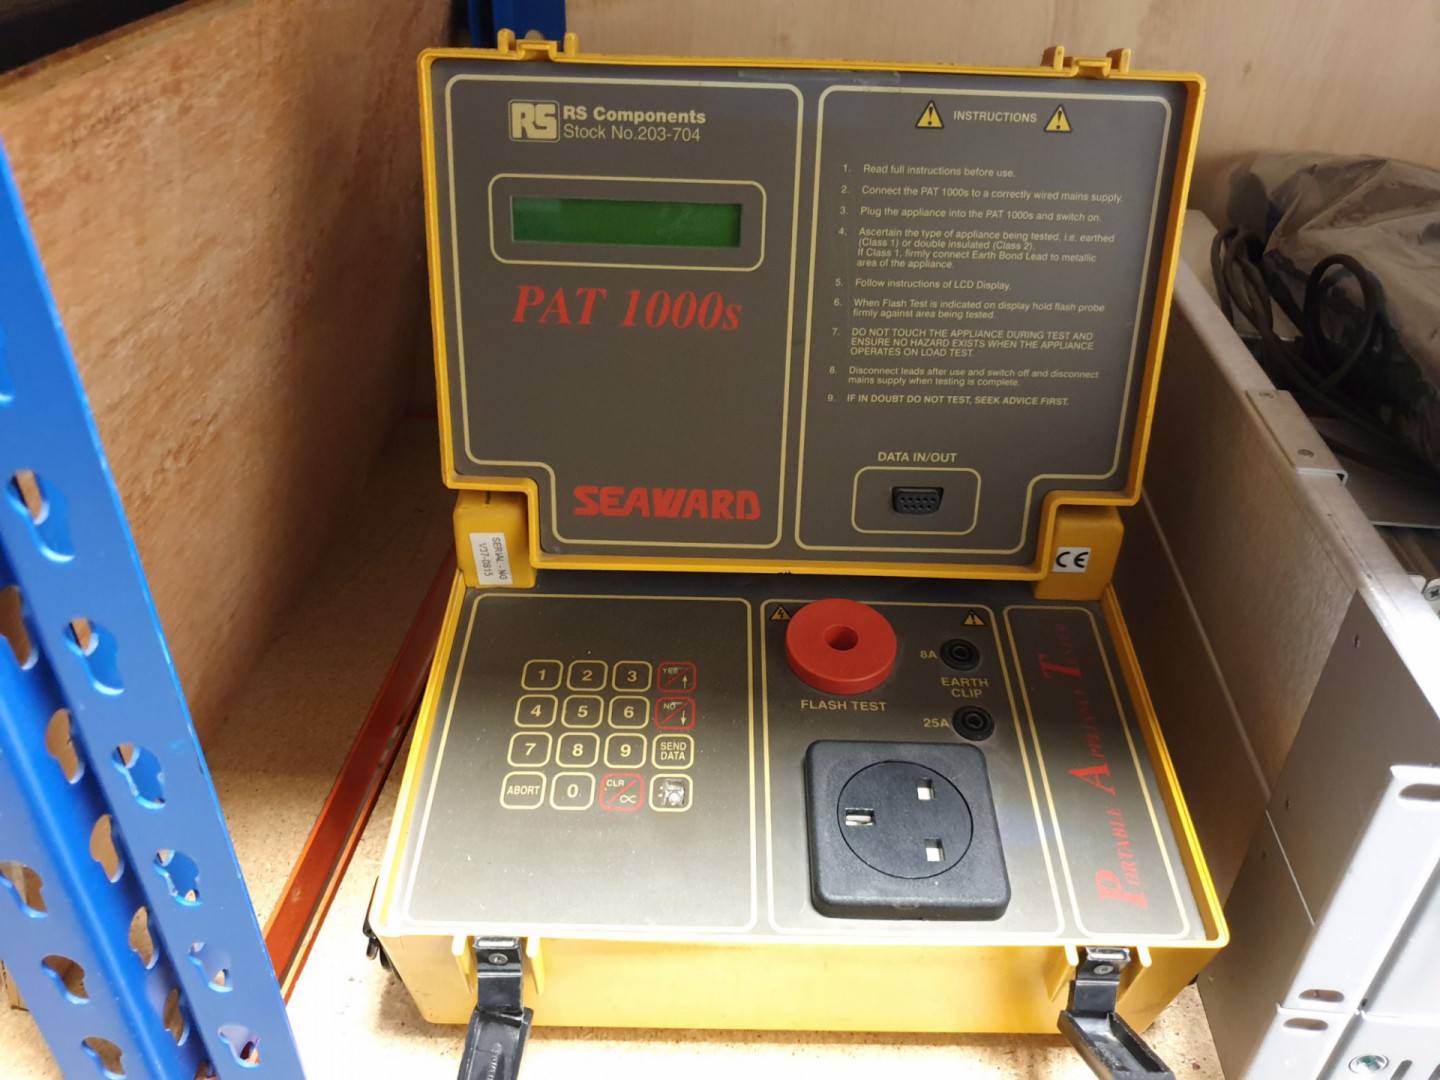 RS 203-704 PAT 10005 portable appliance tester